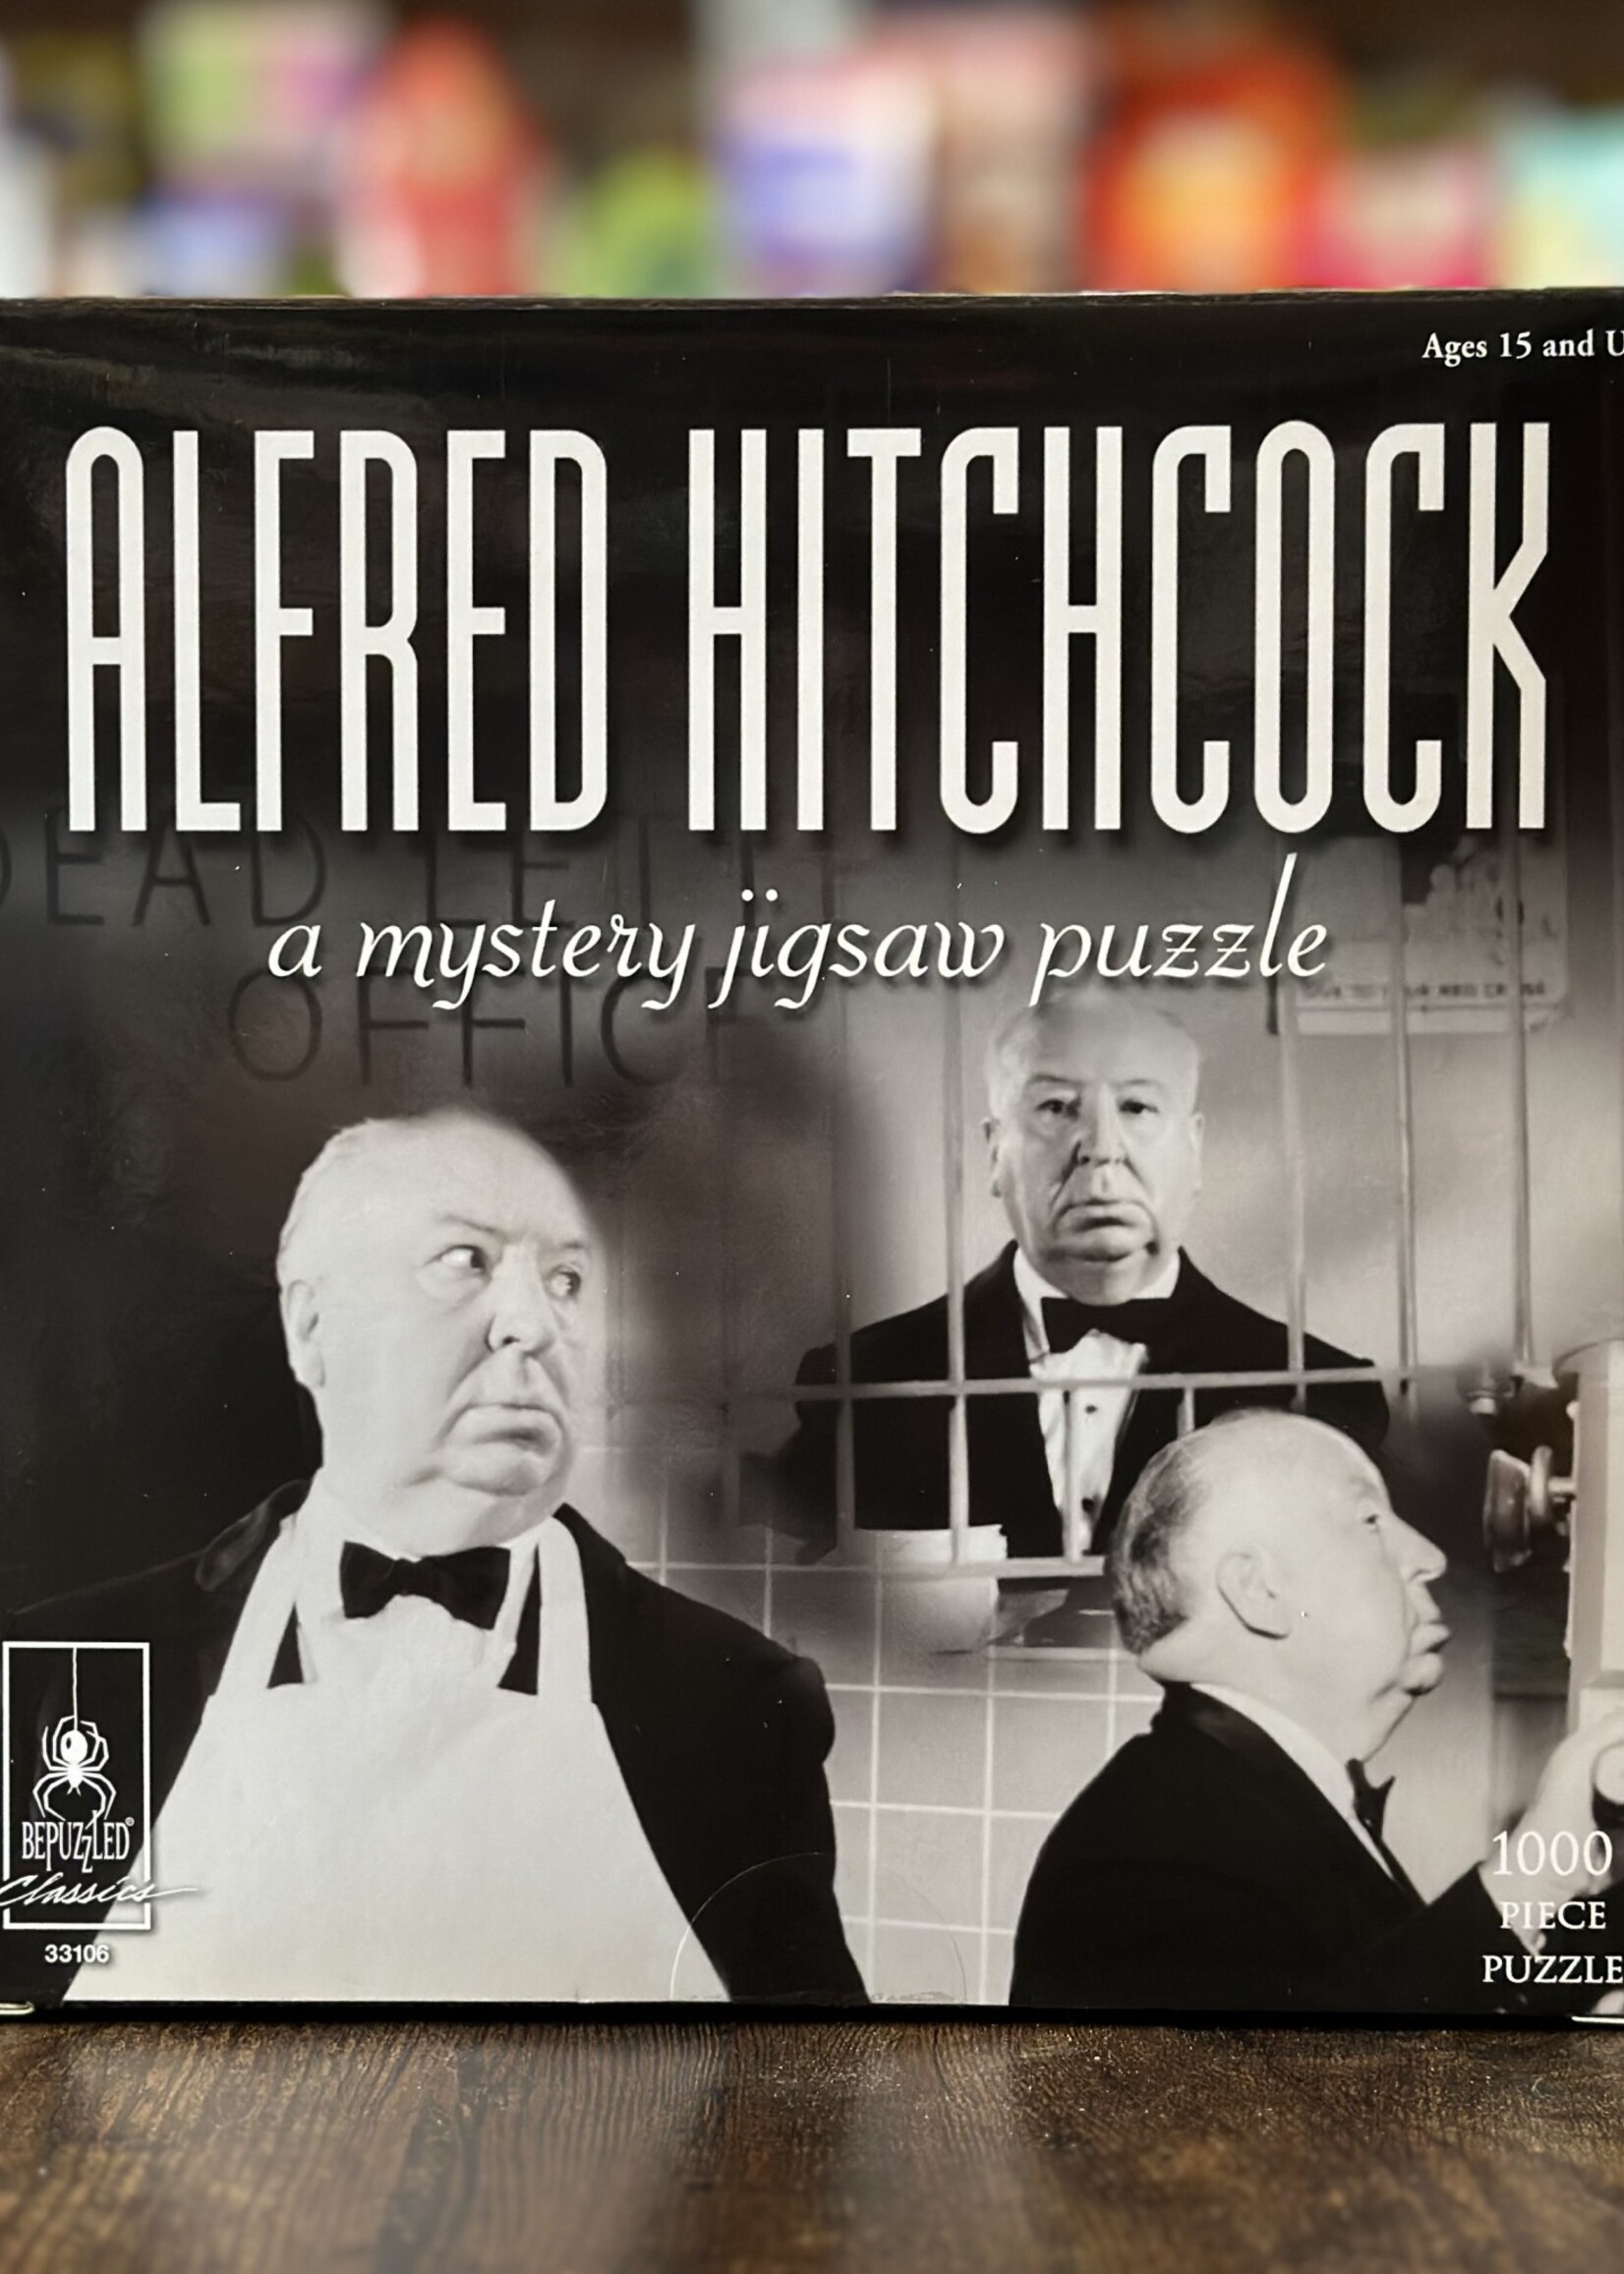 University Games Puzzle - Alfred Hitchcock: A Mystery Jigsaw Puzzle 1000 Pc.